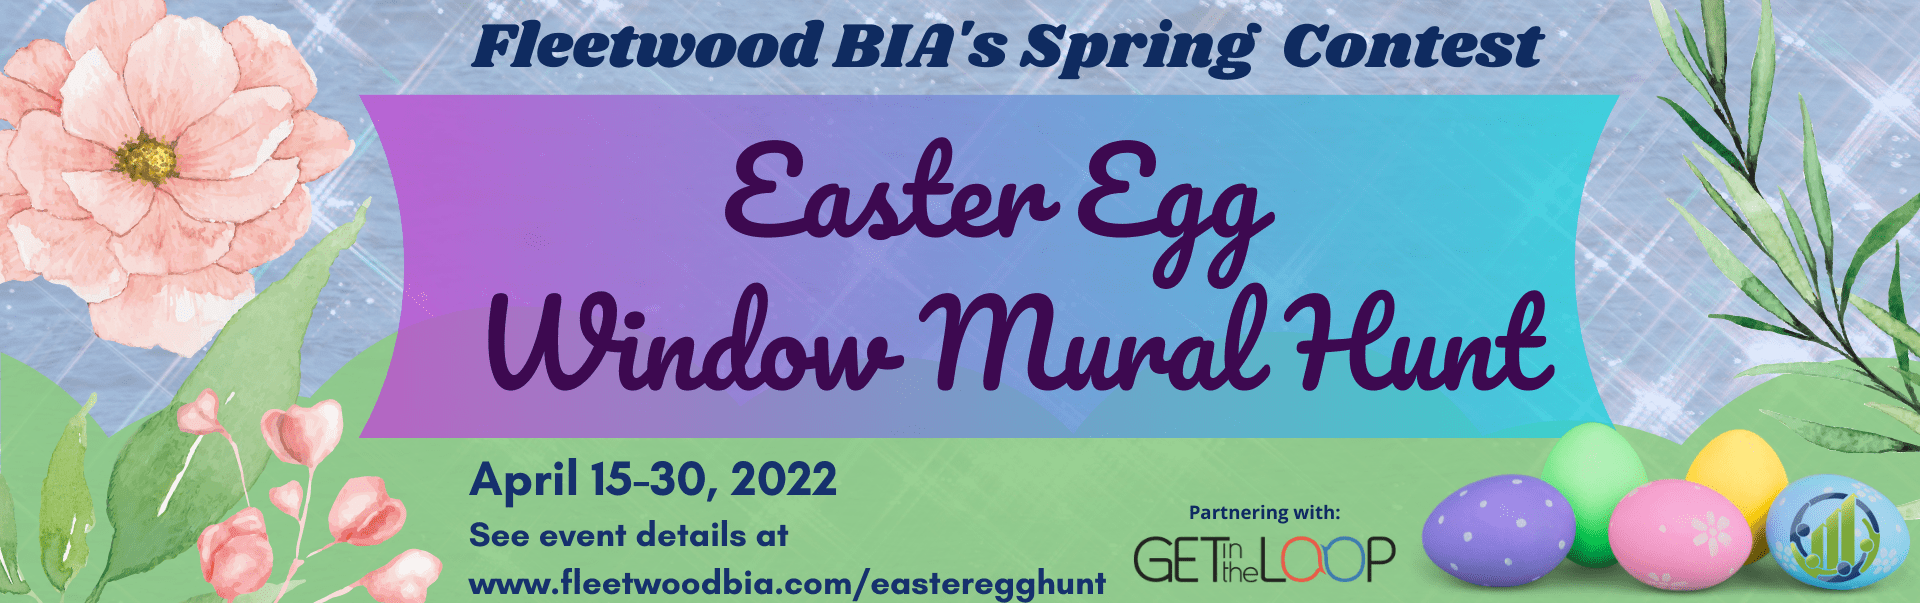 Take part in the Fleetwood BIA’s first annual Easter Egg Mural Hunt!